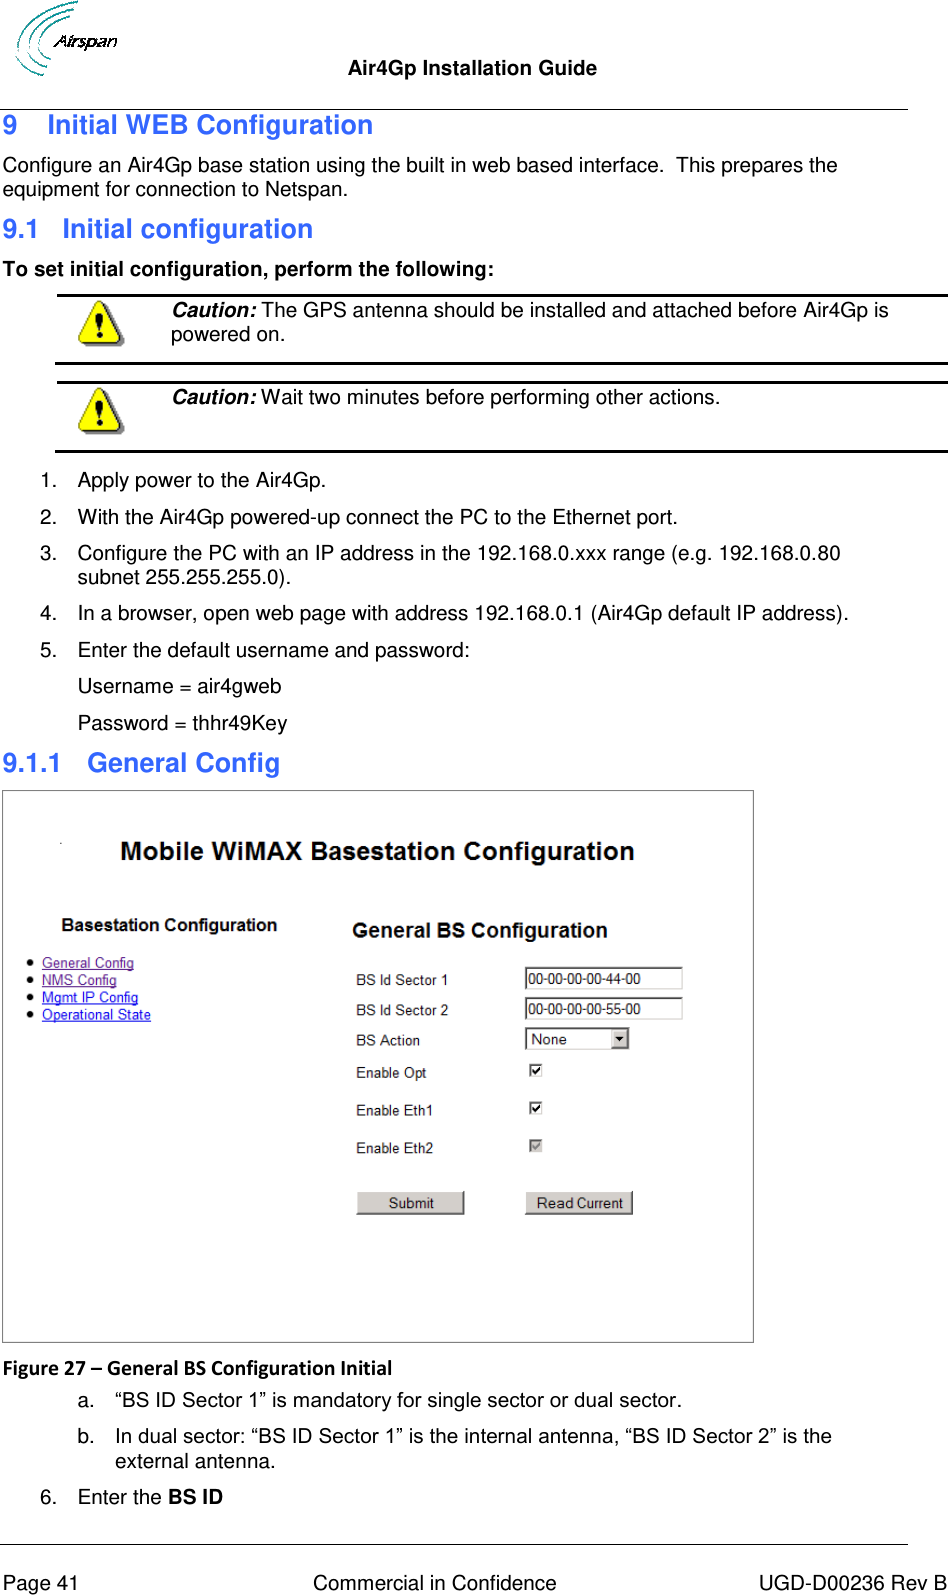  Air4Gp Installation Guide     Page 41  Commercial in Confidence  UGD-D00236 Rev B 9  Initial WEB Configuration Configure an Air4Gp base station using the built in web based interface.  This prepares the equipment for connection to Netspan. 9.1 Initial configuration To set initial configuration, perform the following:  Caution: The GPS antenna should be installed and attached before Air4Gp is powered on.   Caution: Wait two minutes before performing other actions.  1.  Apply power to the Air4Gp. 2.  With the Air4Gp powered-up connect the PC to the Ethernet port. 3.  Configure the PC with an IP address in the 192.168.0.xxx range (e.g. 192.168.0.80 subnet 255.255.255.0). 4.  In a browser, open web page with address 192.168.0.1 (Air4Gp default IP address). 5.  Enter the default username and password: Username = air4gweb Password = thhr49Key 9.1.1  General Config  Figure 27 – General BS Configuration Initial a. “BS ID Sector 1” is mandatory for single sector or dual sector. b. In dual sector: “BS ID Sector 1” is the internal antenna, “BS ID Sector 2” is the external antenna. 6.  Enter the BS ID 